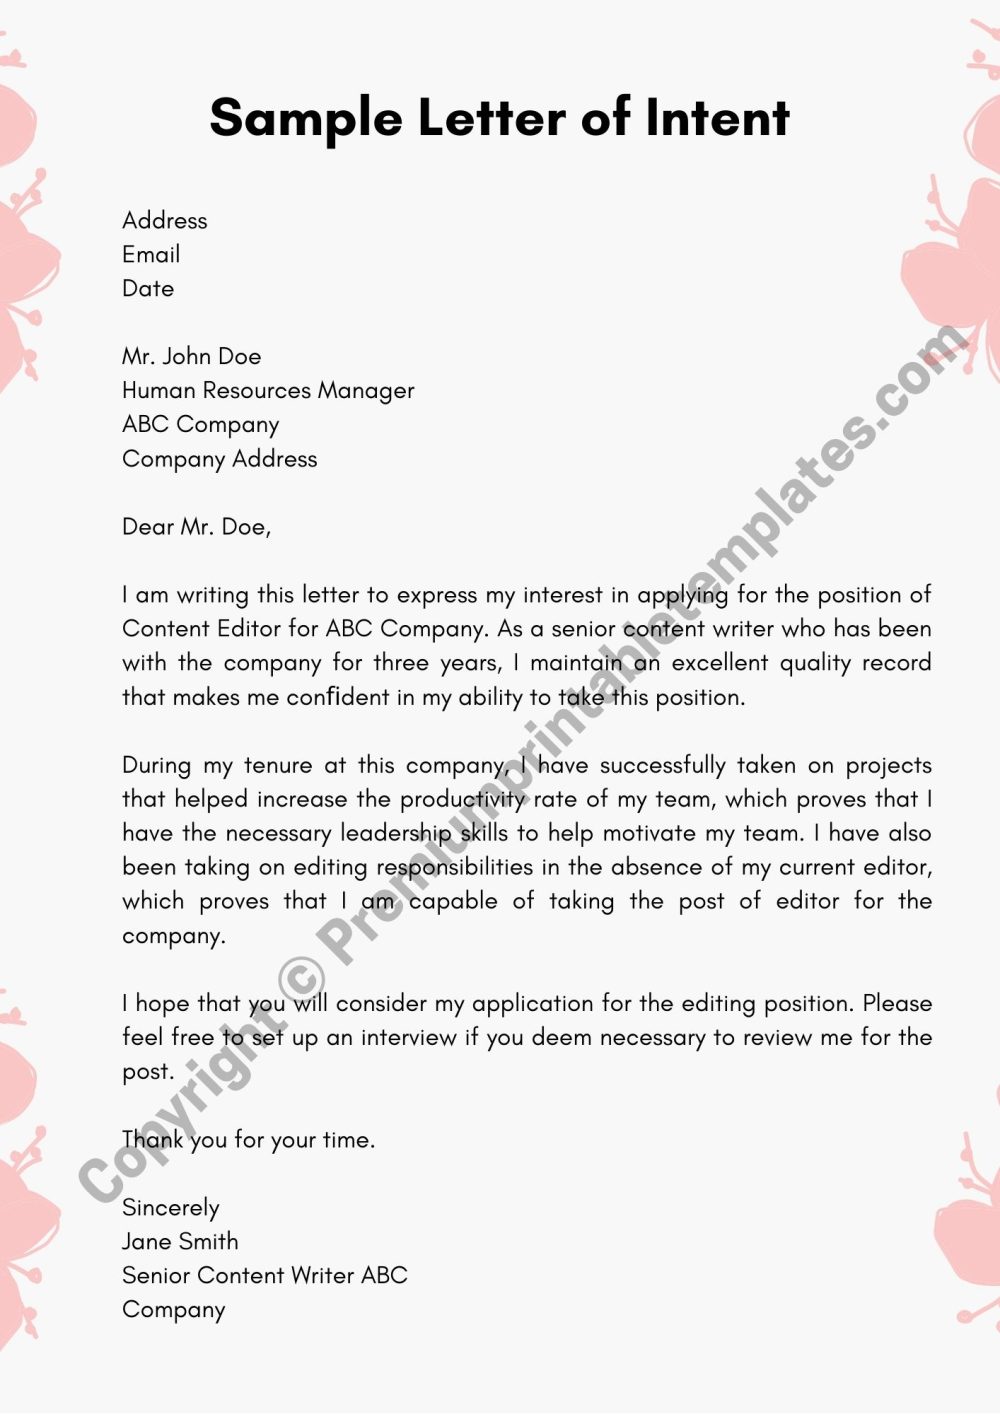 Printable Sample Letter of Intent